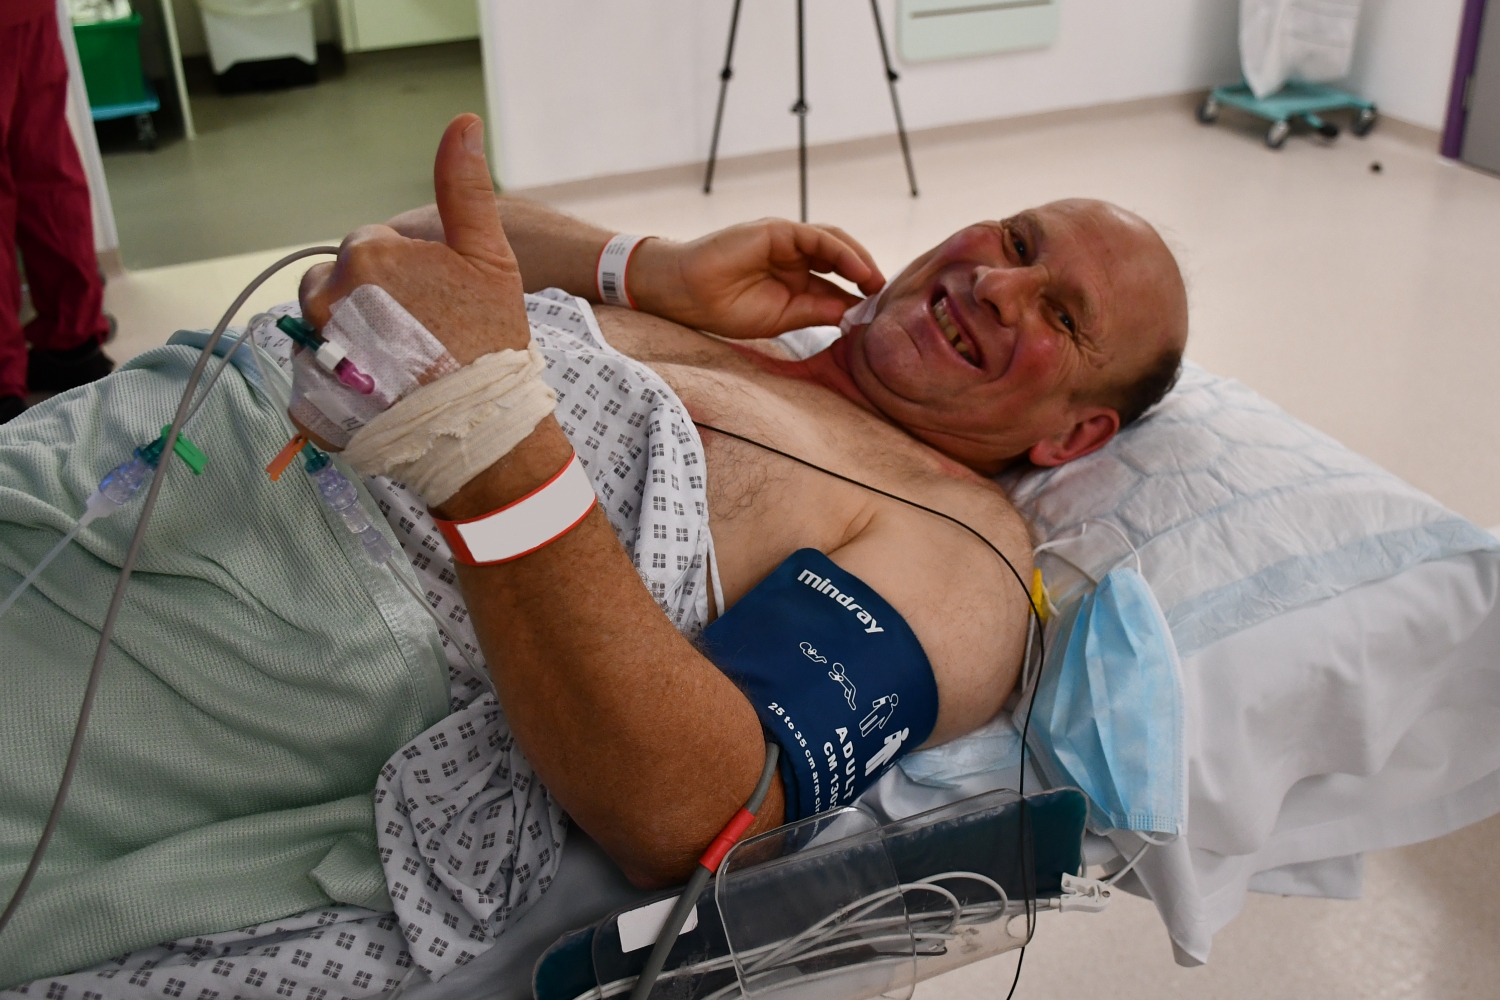 A person on a hospital bed gives a thumbs up.